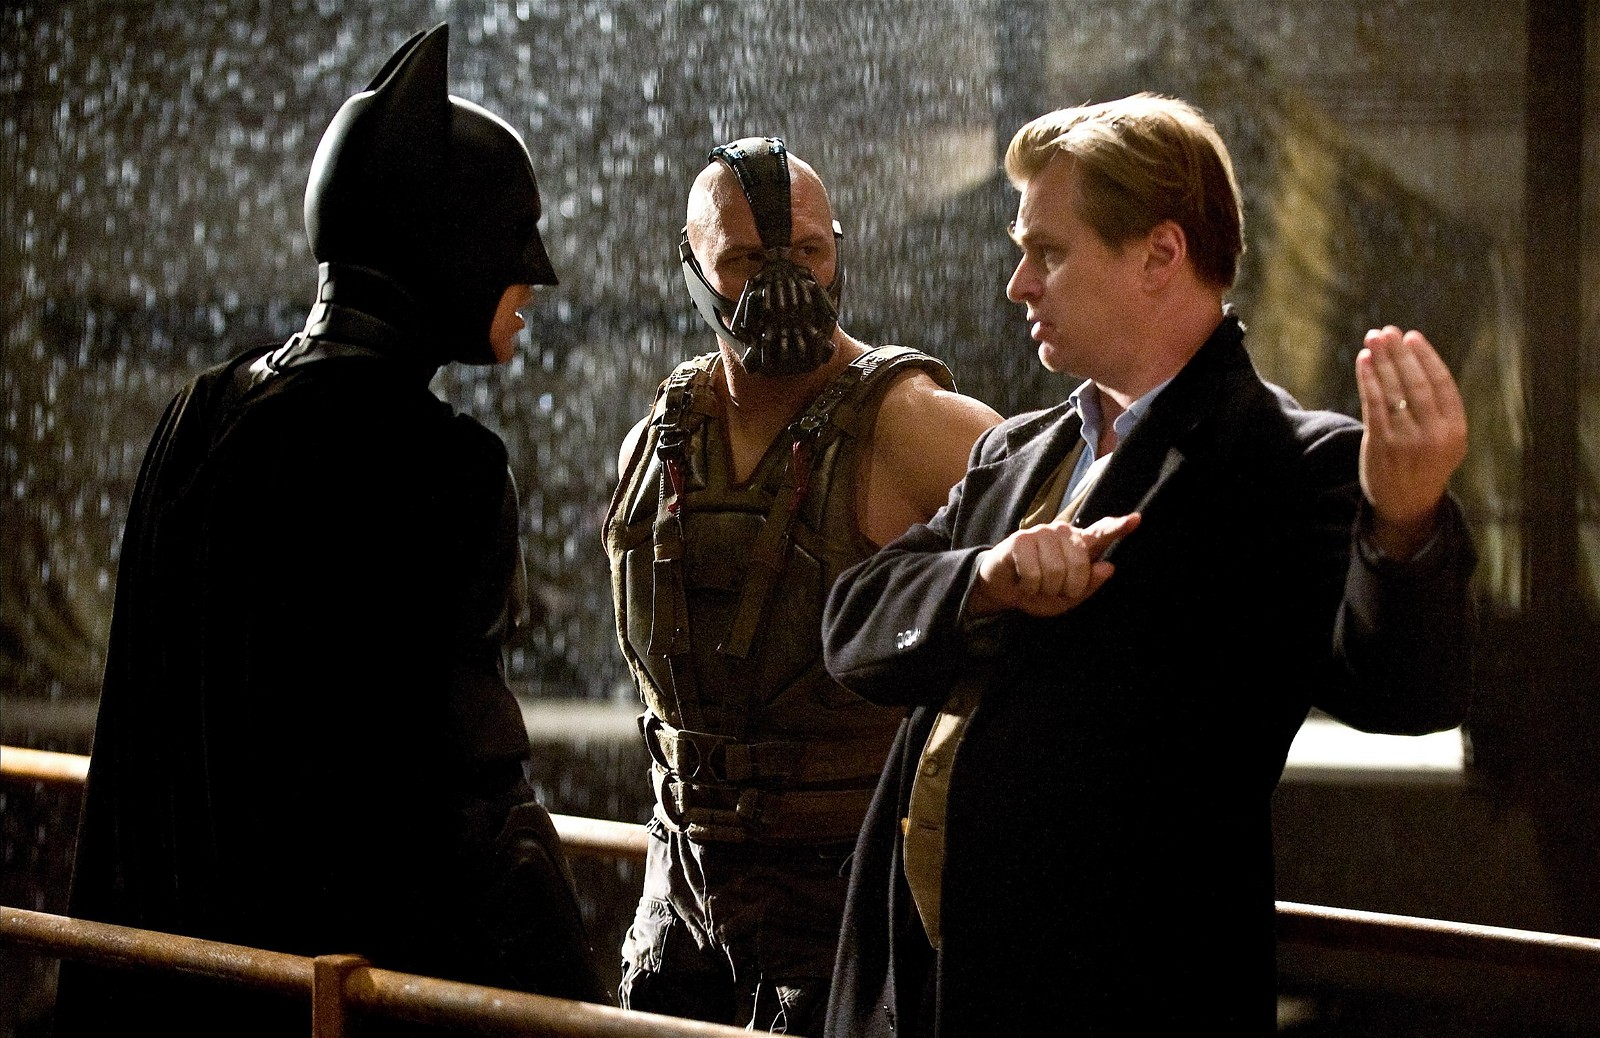 Christopher Nolan on the sets of The Dark Knight Rises